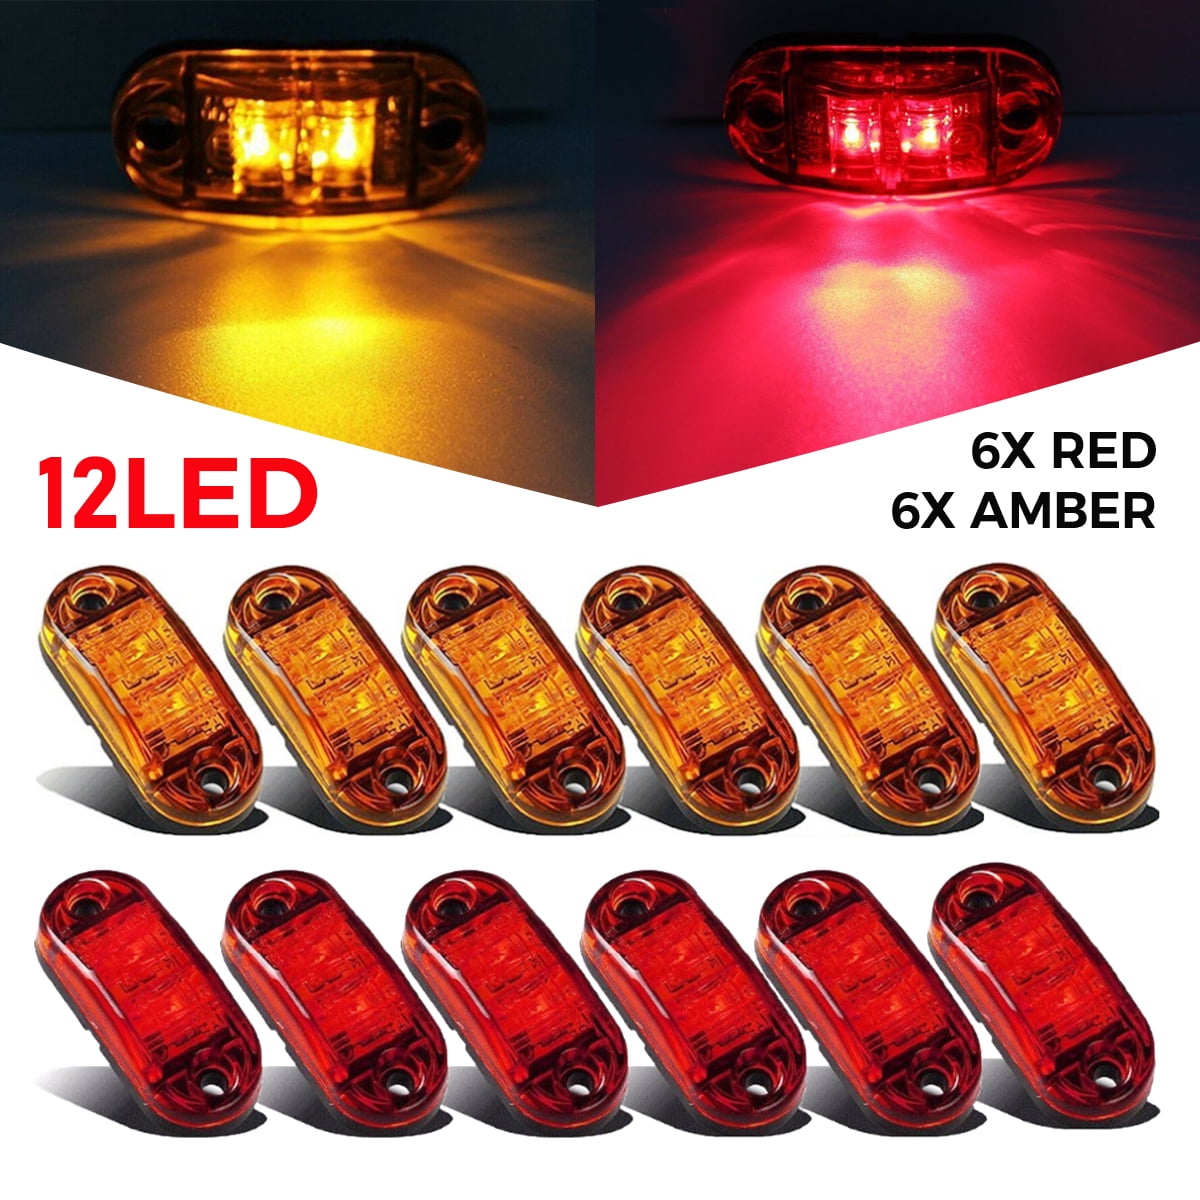 2 RED LED Lights 1.2" x 2.5" Surface Mount Clearance Marker trailer USA MADE 